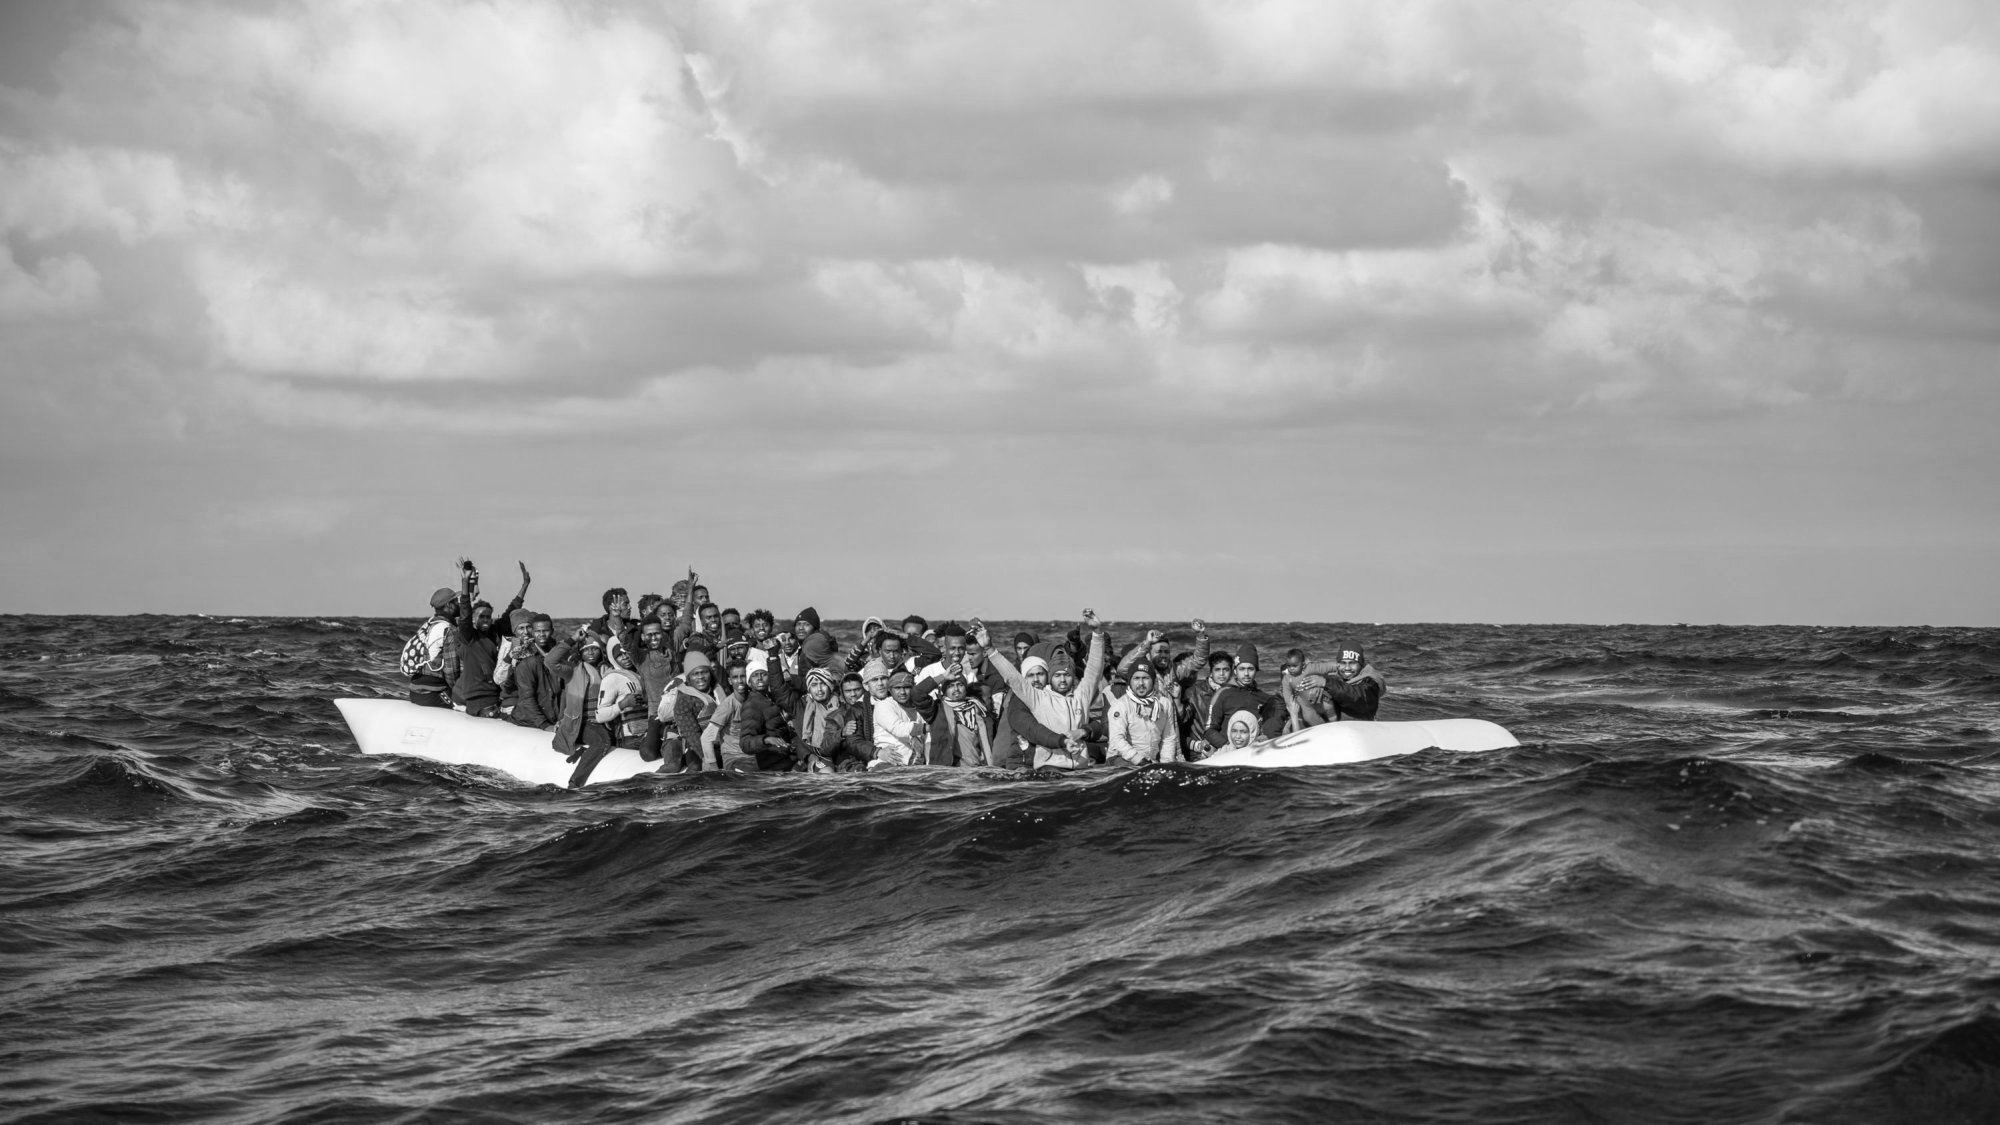 Deadly dreams, the migratory route from Tunisia